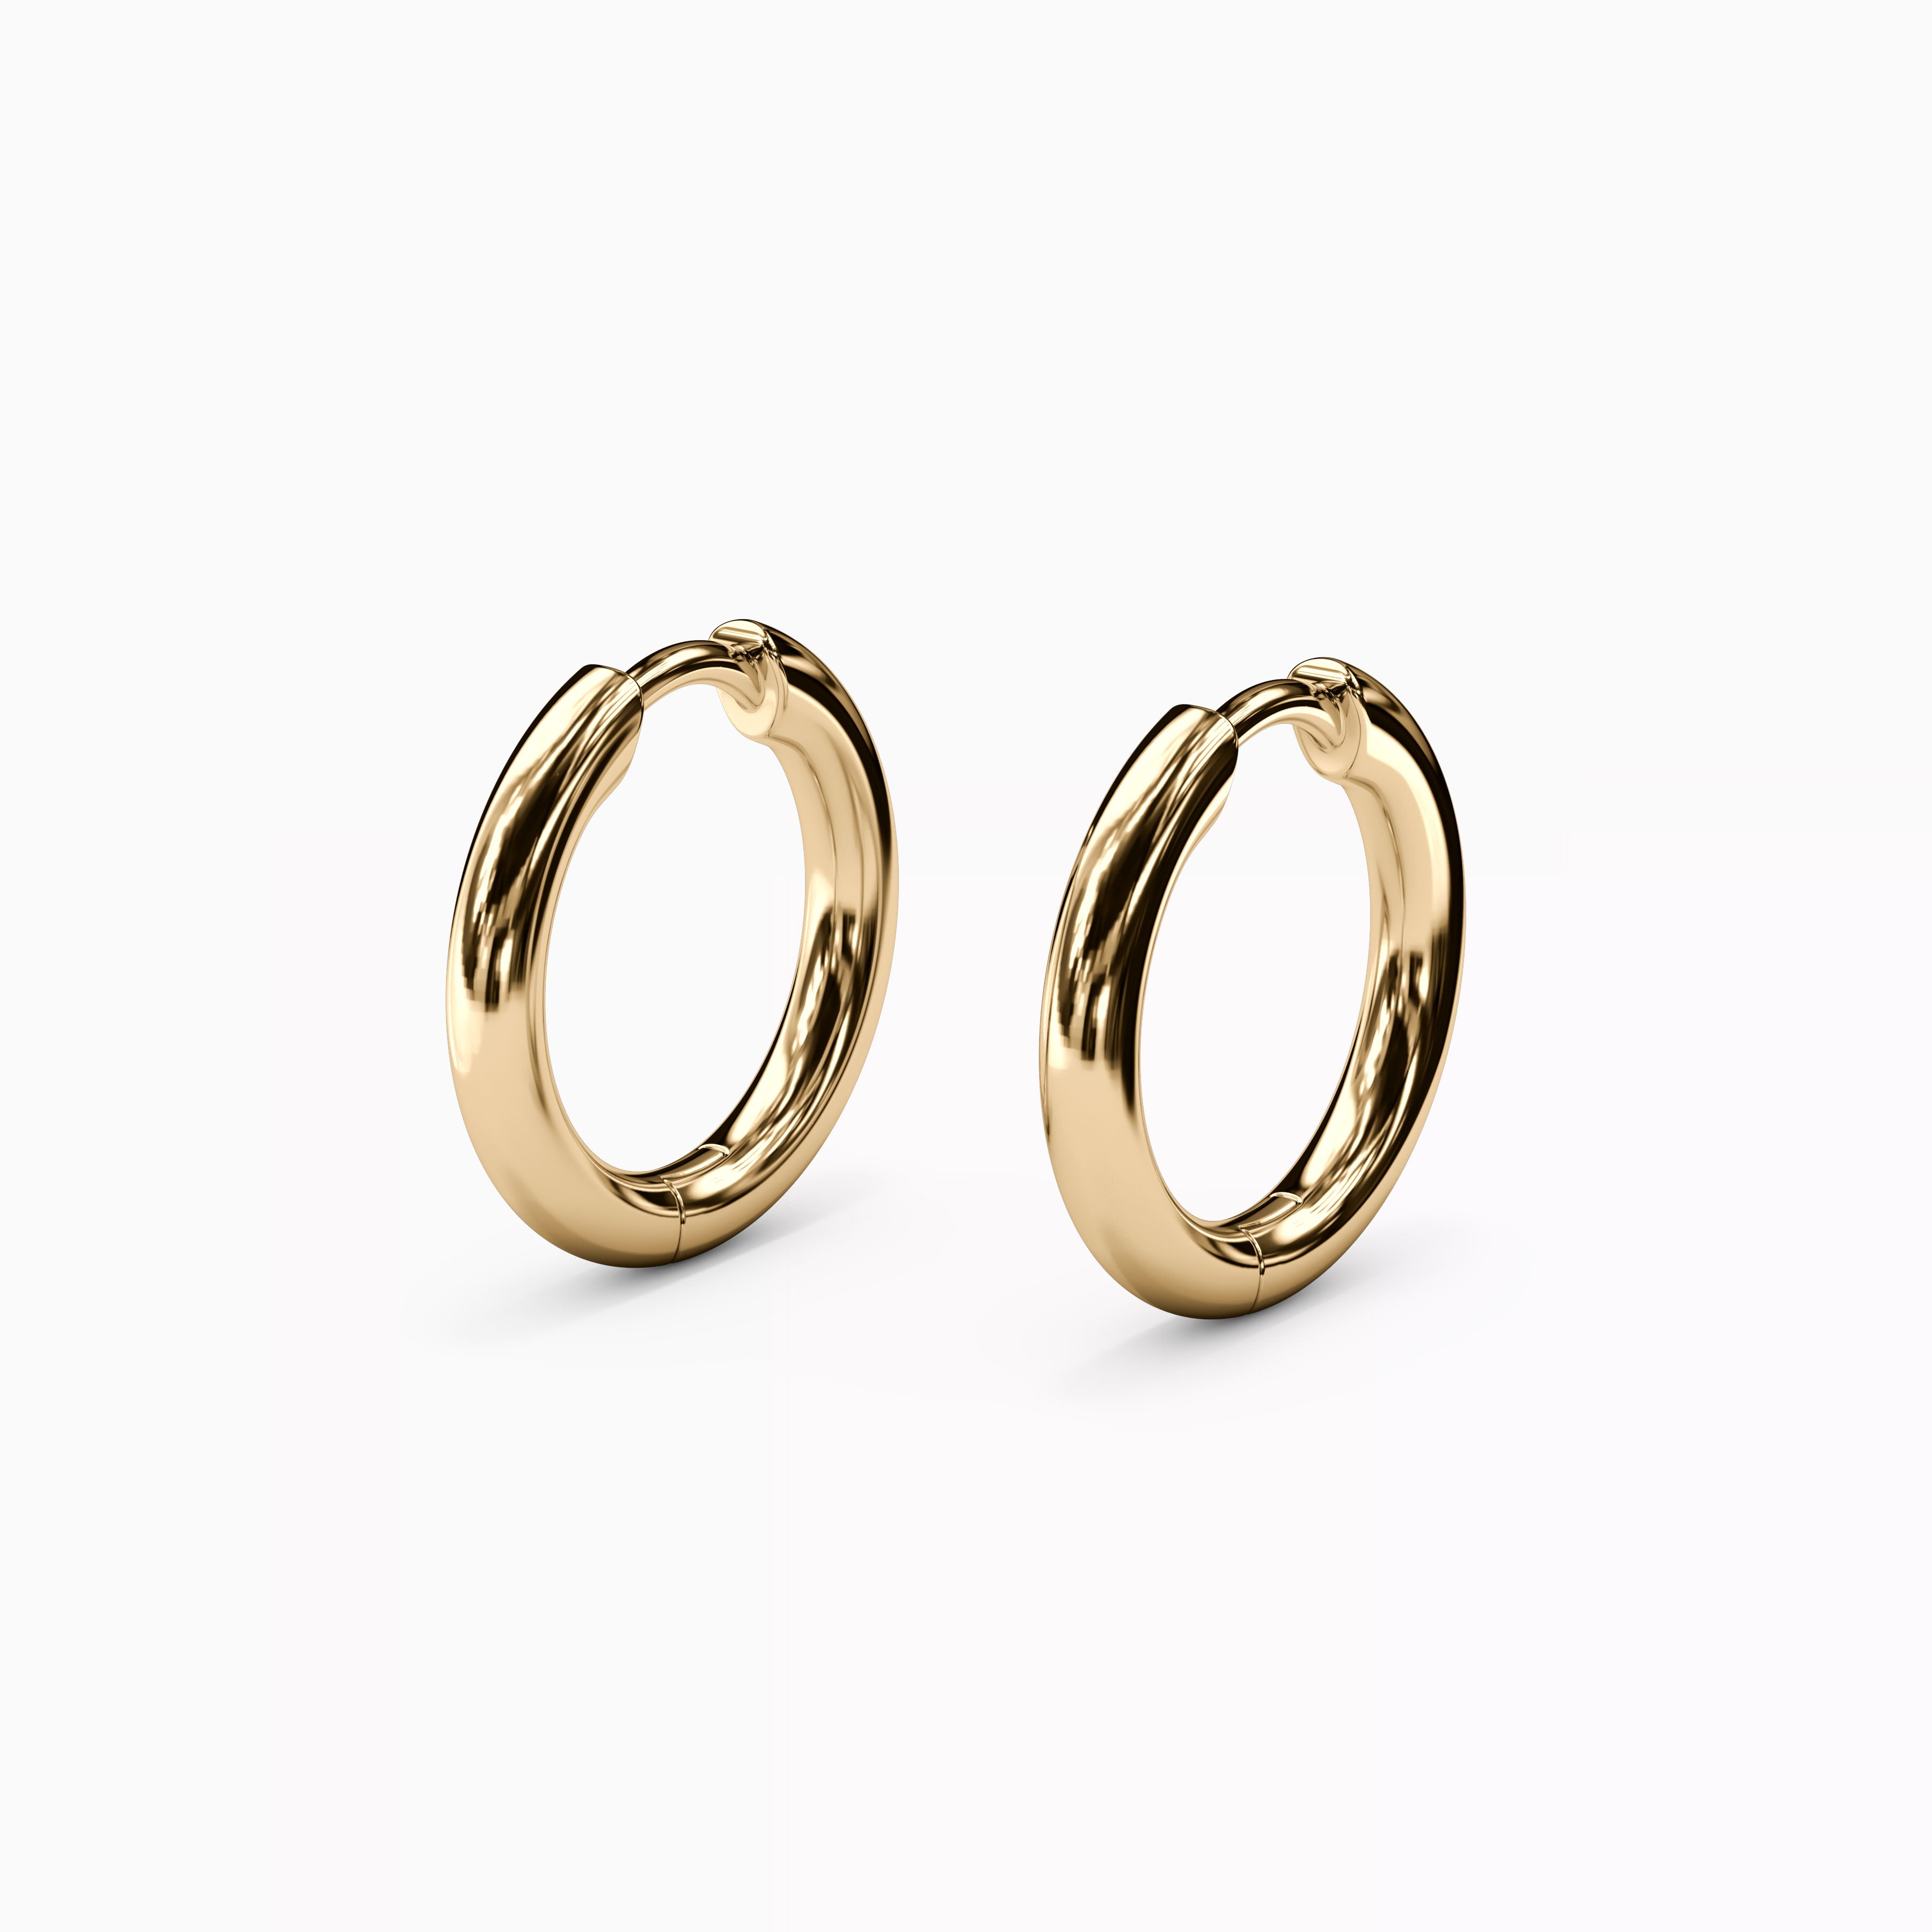 Fashion Silver Gold Frosted Hoop Earrings Mens Womens Stainless Steel Small  Stud Earring Minimalism Style For Women Men Whole 259g From Urzfo, $3.99 |  DHgate.Com